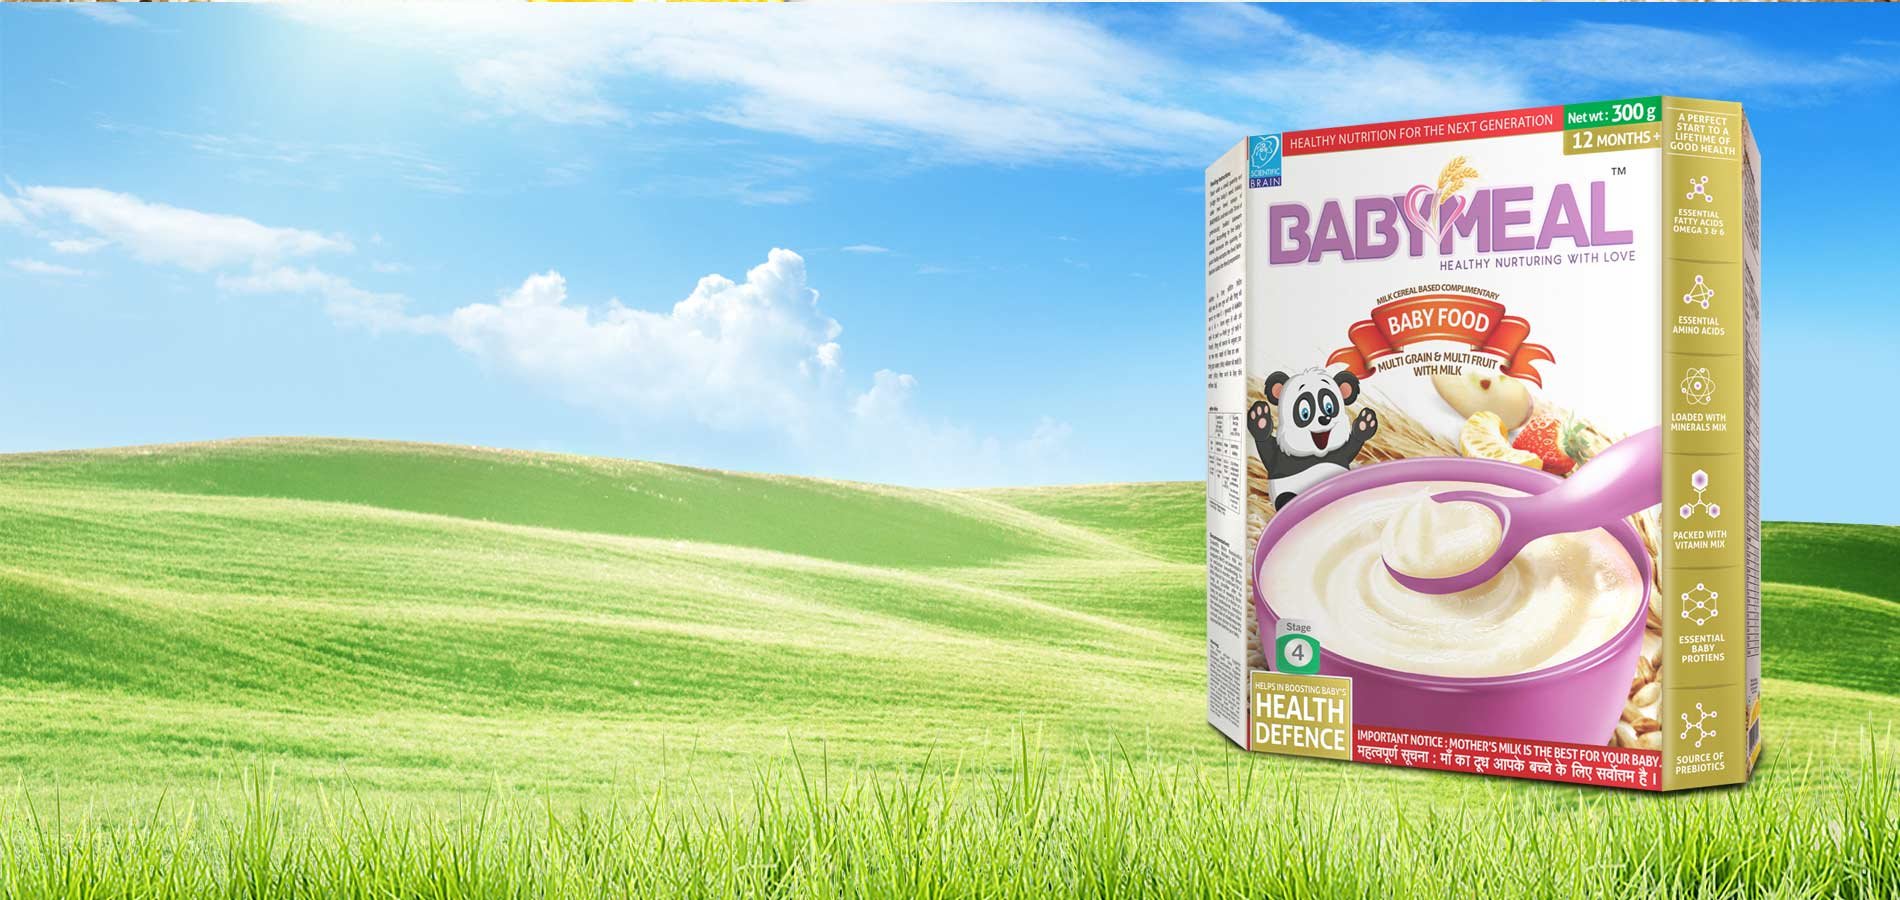 Babymeal,milk based cereal food, wheat cereal baby food, healthy infant food, best baby food manufacturers, organic baby food brand, food for babies, Indian, granum, grainylac, Rice cereal baby food brand, best healthy baby food, best Indian manufacturers, iron fortified, first solid food, vitamins, infant food brand, organic food, Baby best cereal food, granum, scientific brain Nutraceutical, best healthy baby food brand india, infant food brand, infant healthy baby food brand,  toddlers, nutritious baby food online, First solid food brand, organic food, 18 months baby food brand, 12 months baby food brand, infant cereal brand, Indian baby food, best baby food brand, baby products, first food, moms food, home made food, organic baby formula food, premade baby food, toddlers food brand, natural baby food, startup baby food brand, infant healthy baby, Baby food online, Baby cereals, Multivitamin food infants, Milk base toddlers food, Breast feeding, Healthy baby food packaging, Brij Design Studio, babymeal, Grainylac, Yummy for Mummy, Kidolac, homemade baby food, creative packaging design, baby food packaging , Indian consumer brand, food for infants, early food, Indian baby food, Infants food, Healthy toddlers, growing toddlers brand, Mothers food brand, Indian toddlers brand, Health brand India, Kids brands, baby product, pediatric recommended, doctors recommended, toddler food